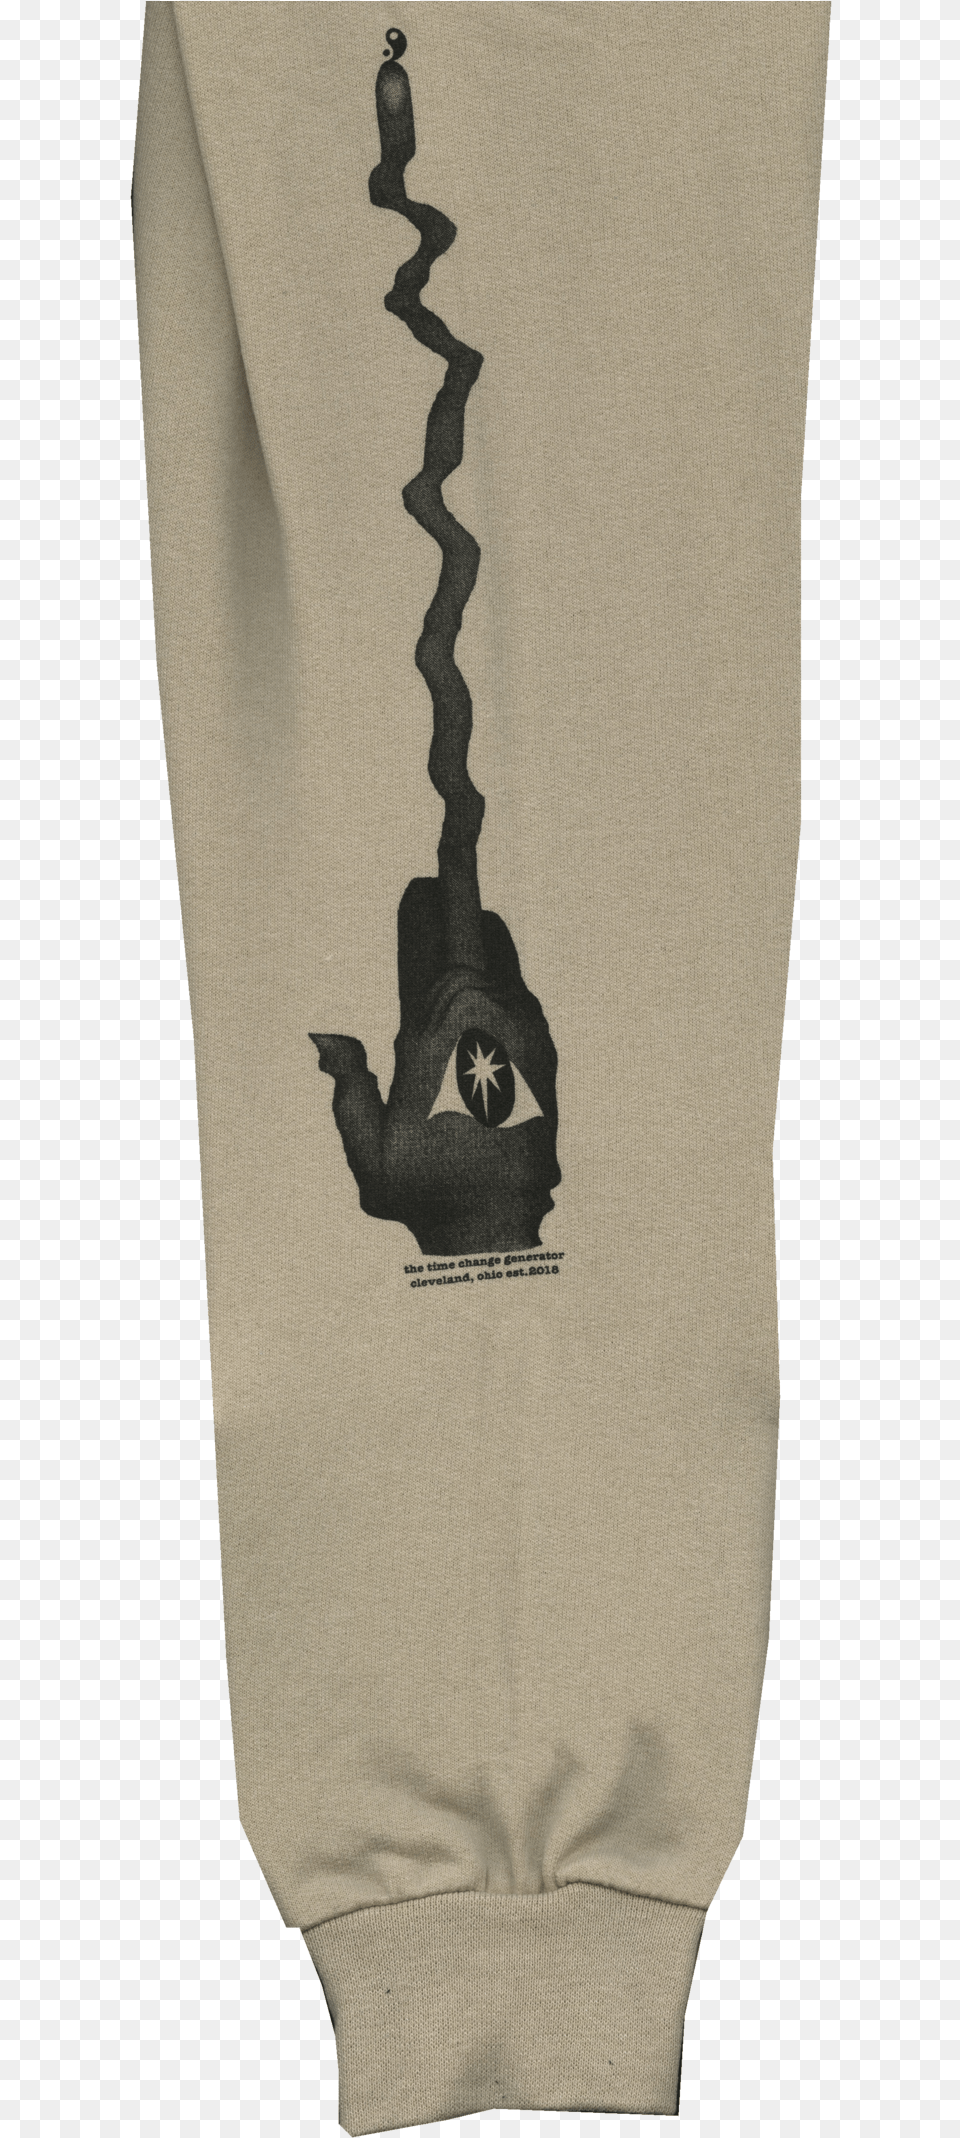 Sandstone Fuck Sleeve Two Toed Sloth, Clothing, Knitwear, Sweater, Sweatshirt Png Image